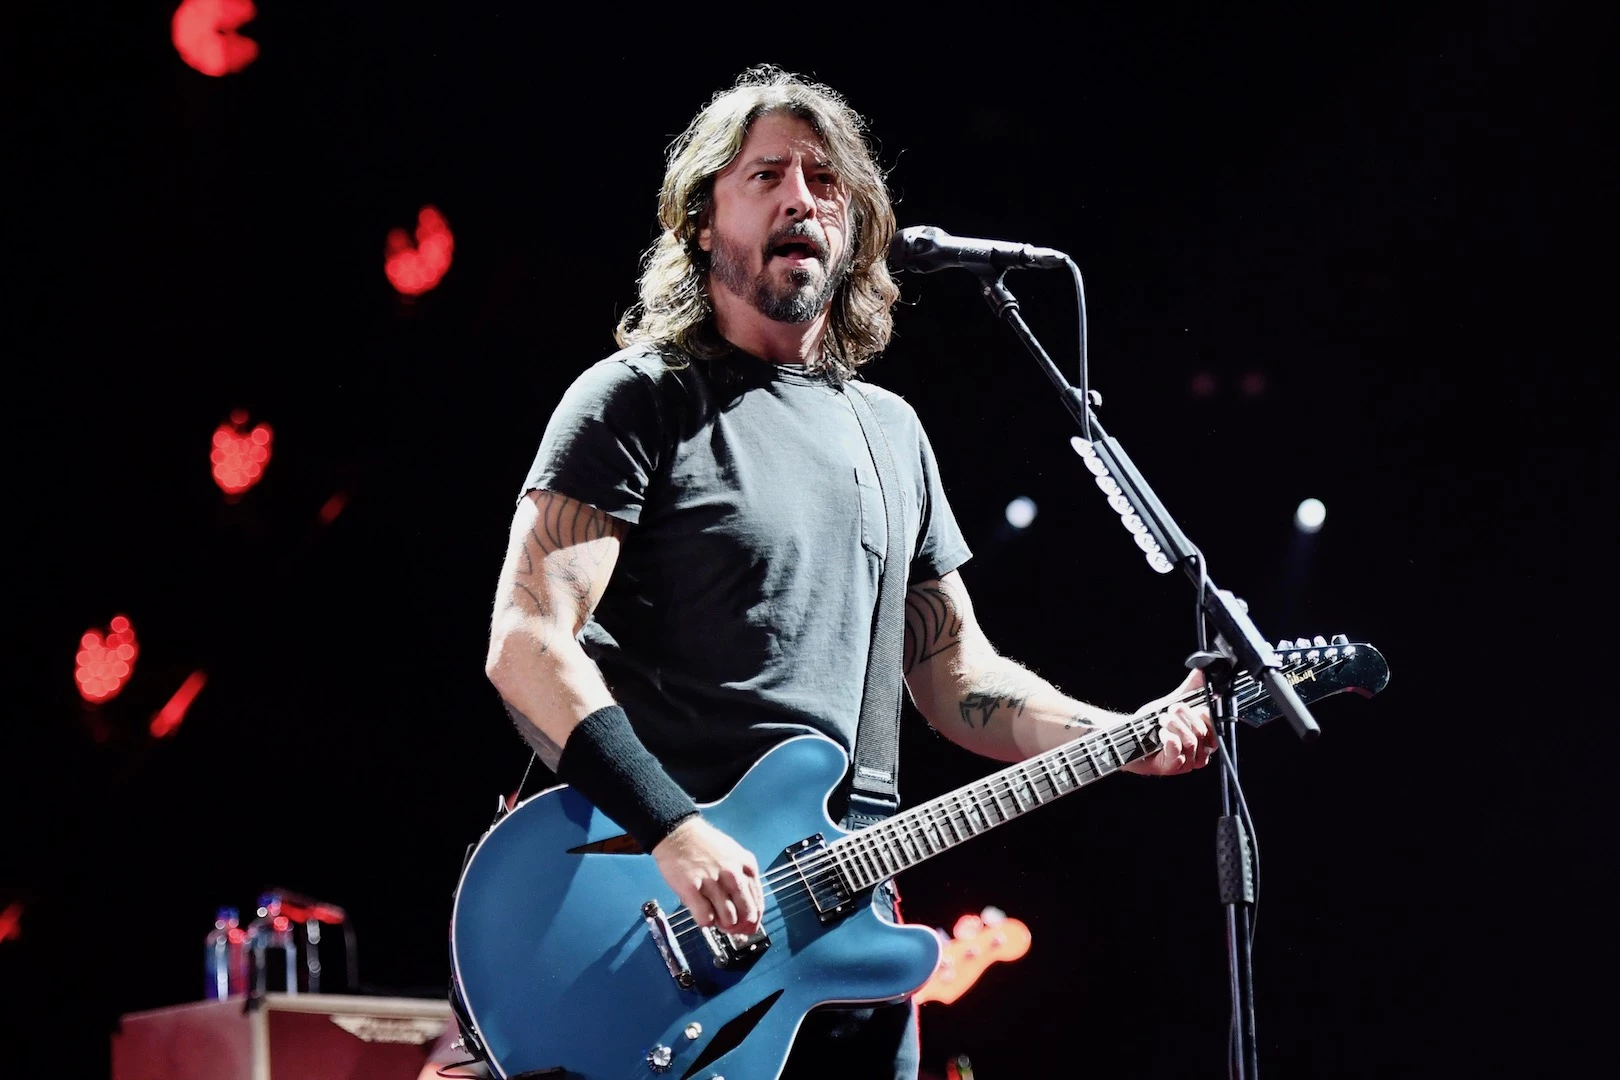 Dave Grohl Reunited With The Girl From Nirvana's “Heart-Shaped Box” Video